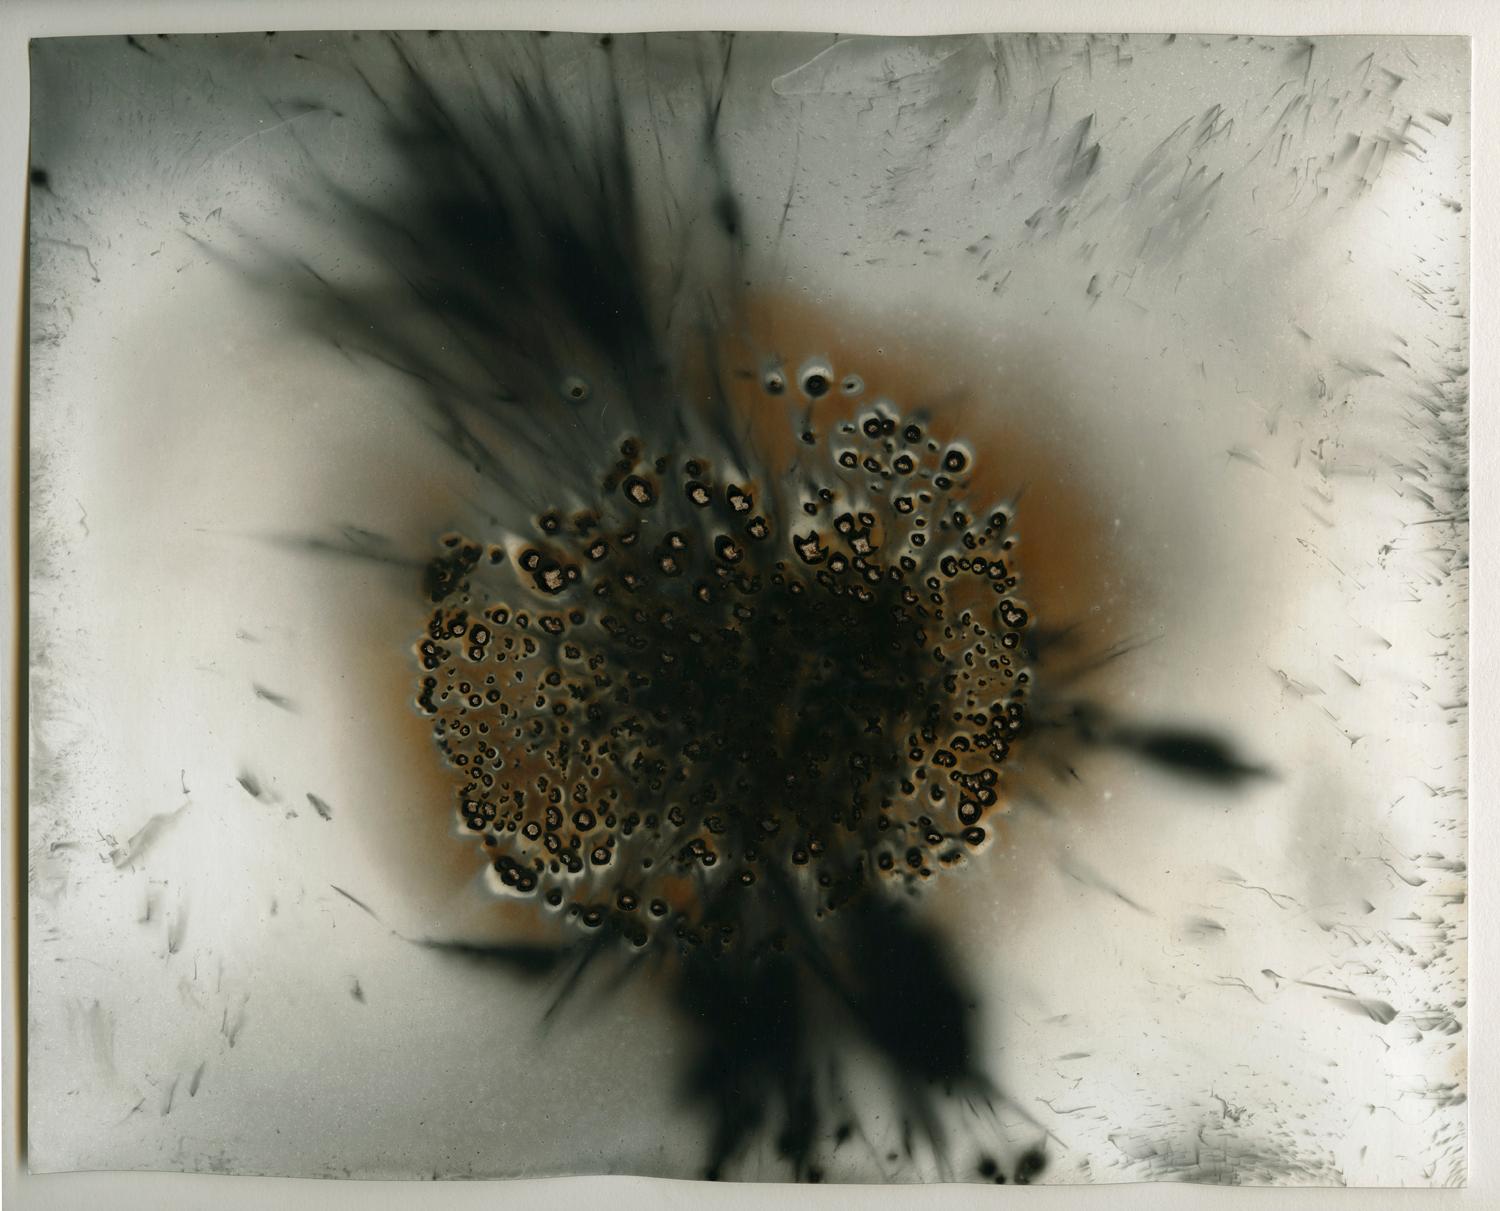 Christopher Colville Abstract Photograph - Untitled (W.O.F 15-41)